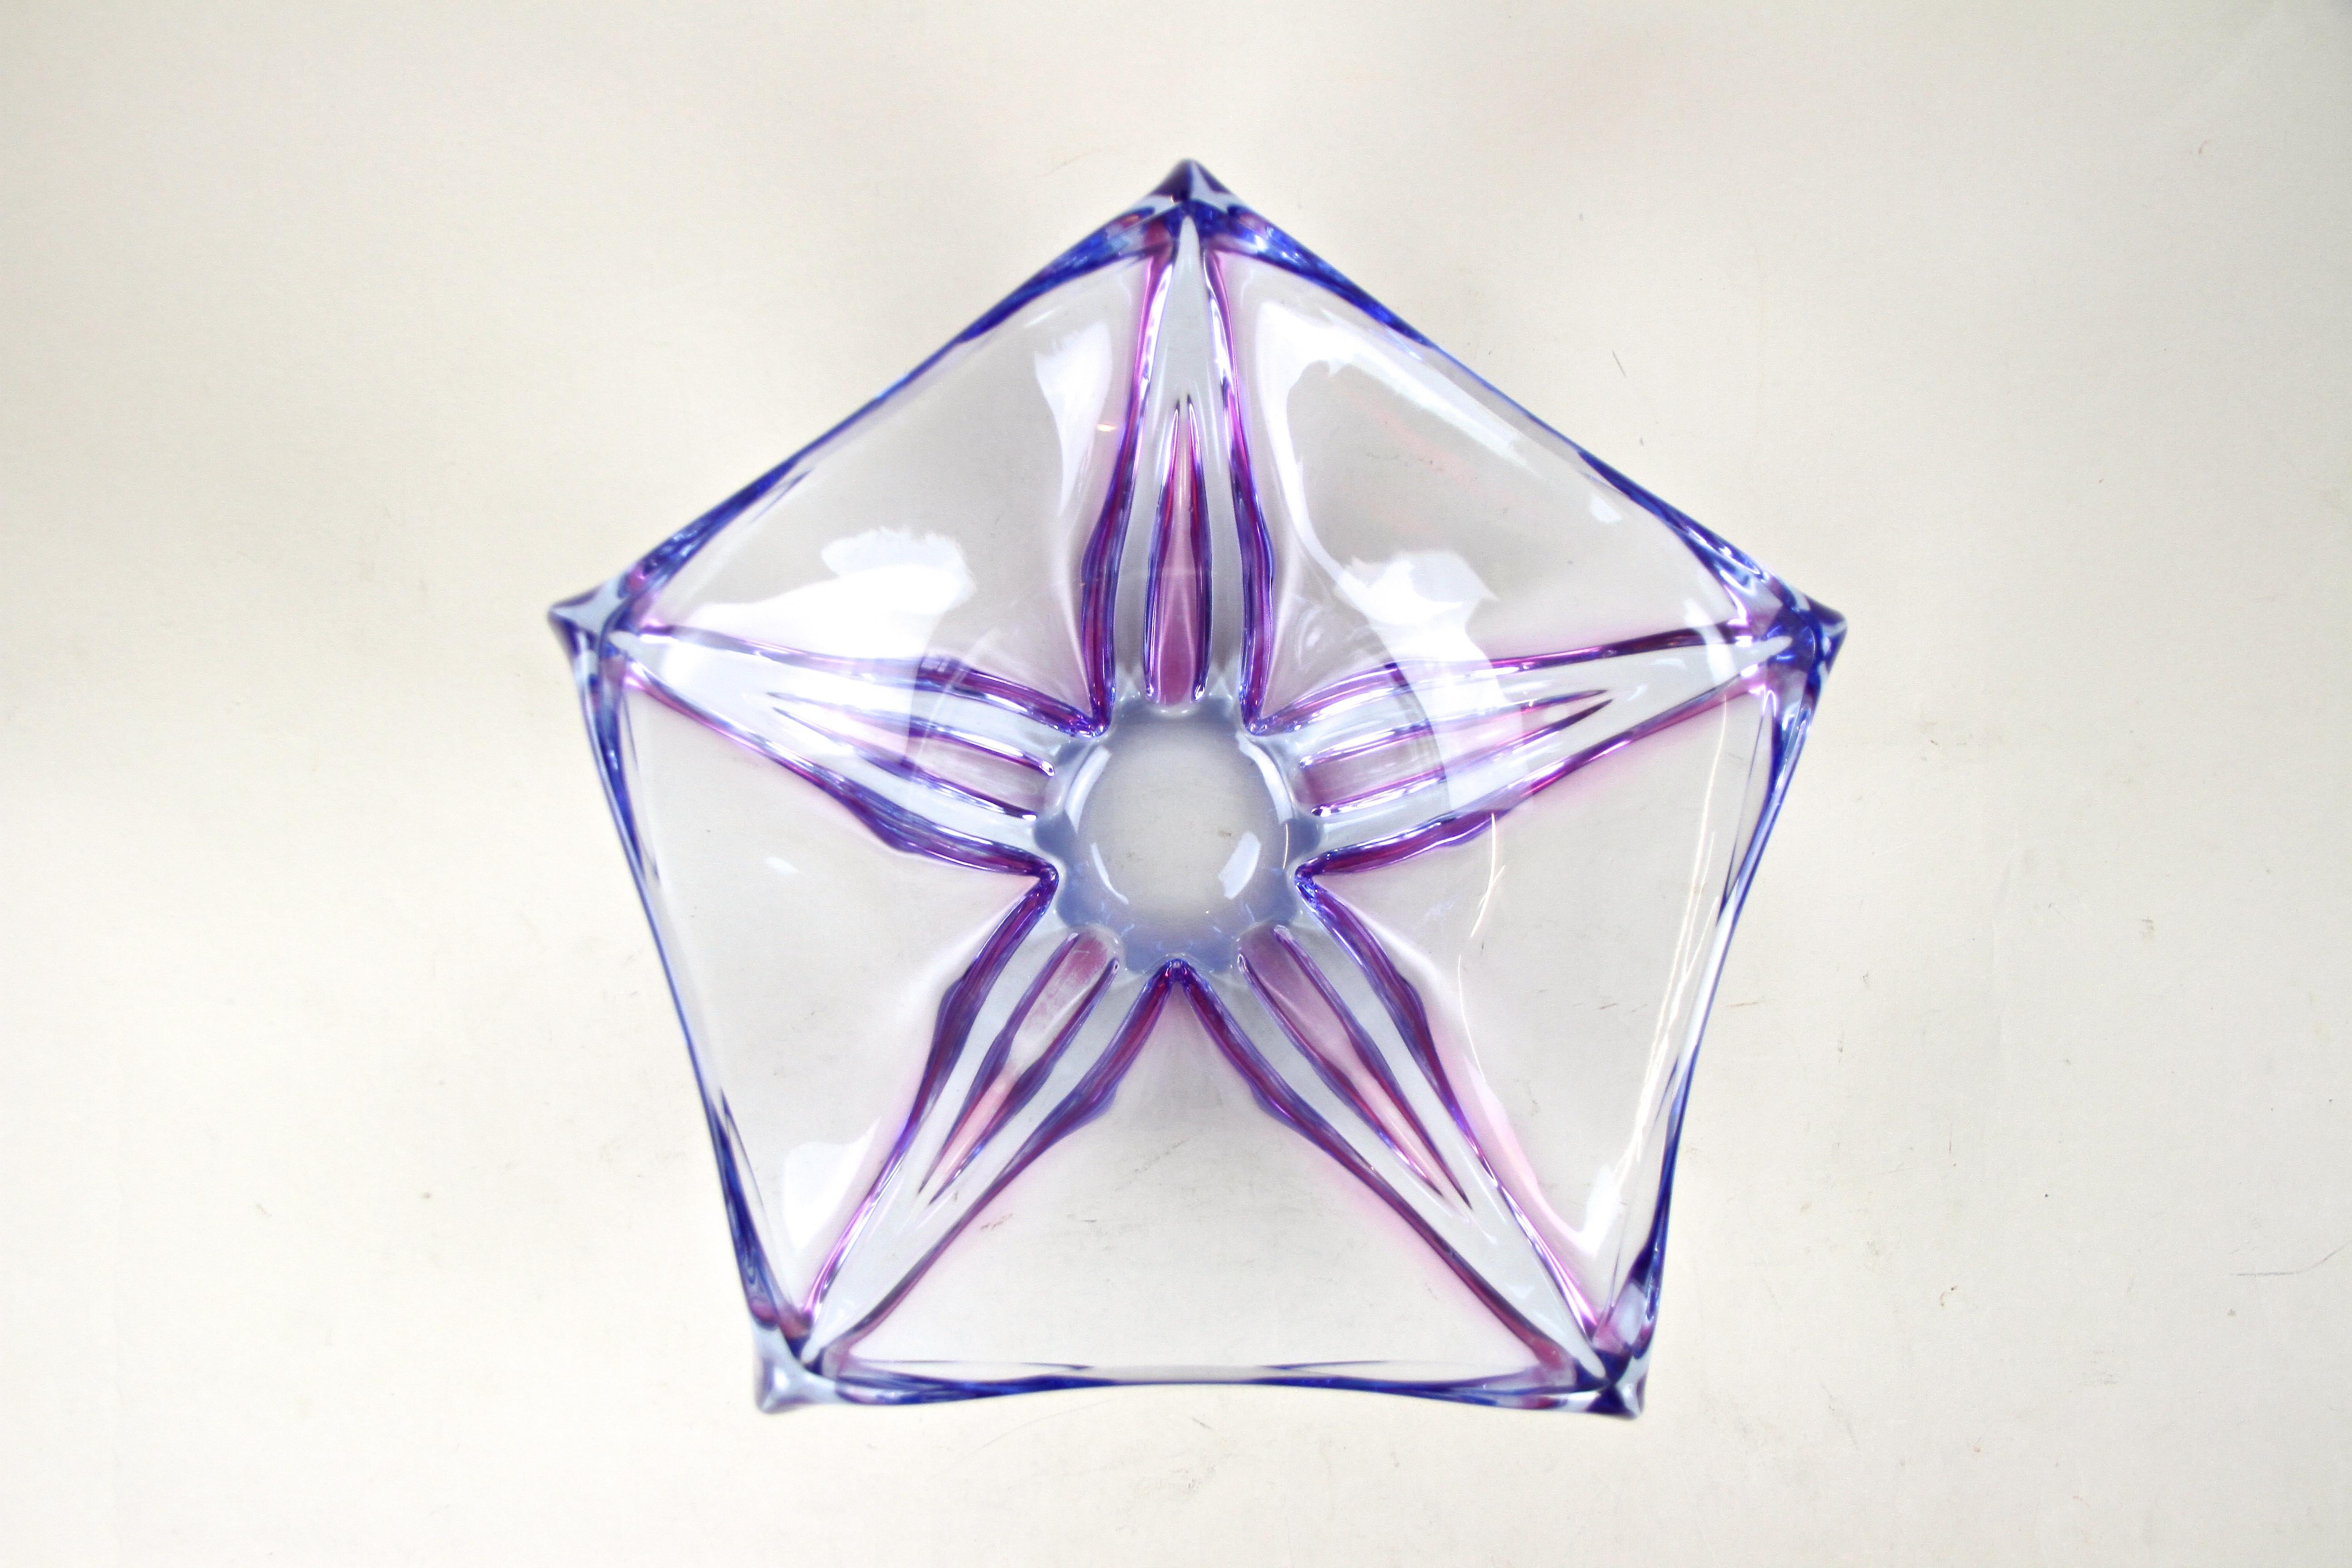 Extraordinary pentagonal Murano glass bowl out of the world renown workshops in Italy from the period around 1960/70. This very modern looking glass bowl reminds of a star or starfish when you look from above. Beautiful details like the amazing